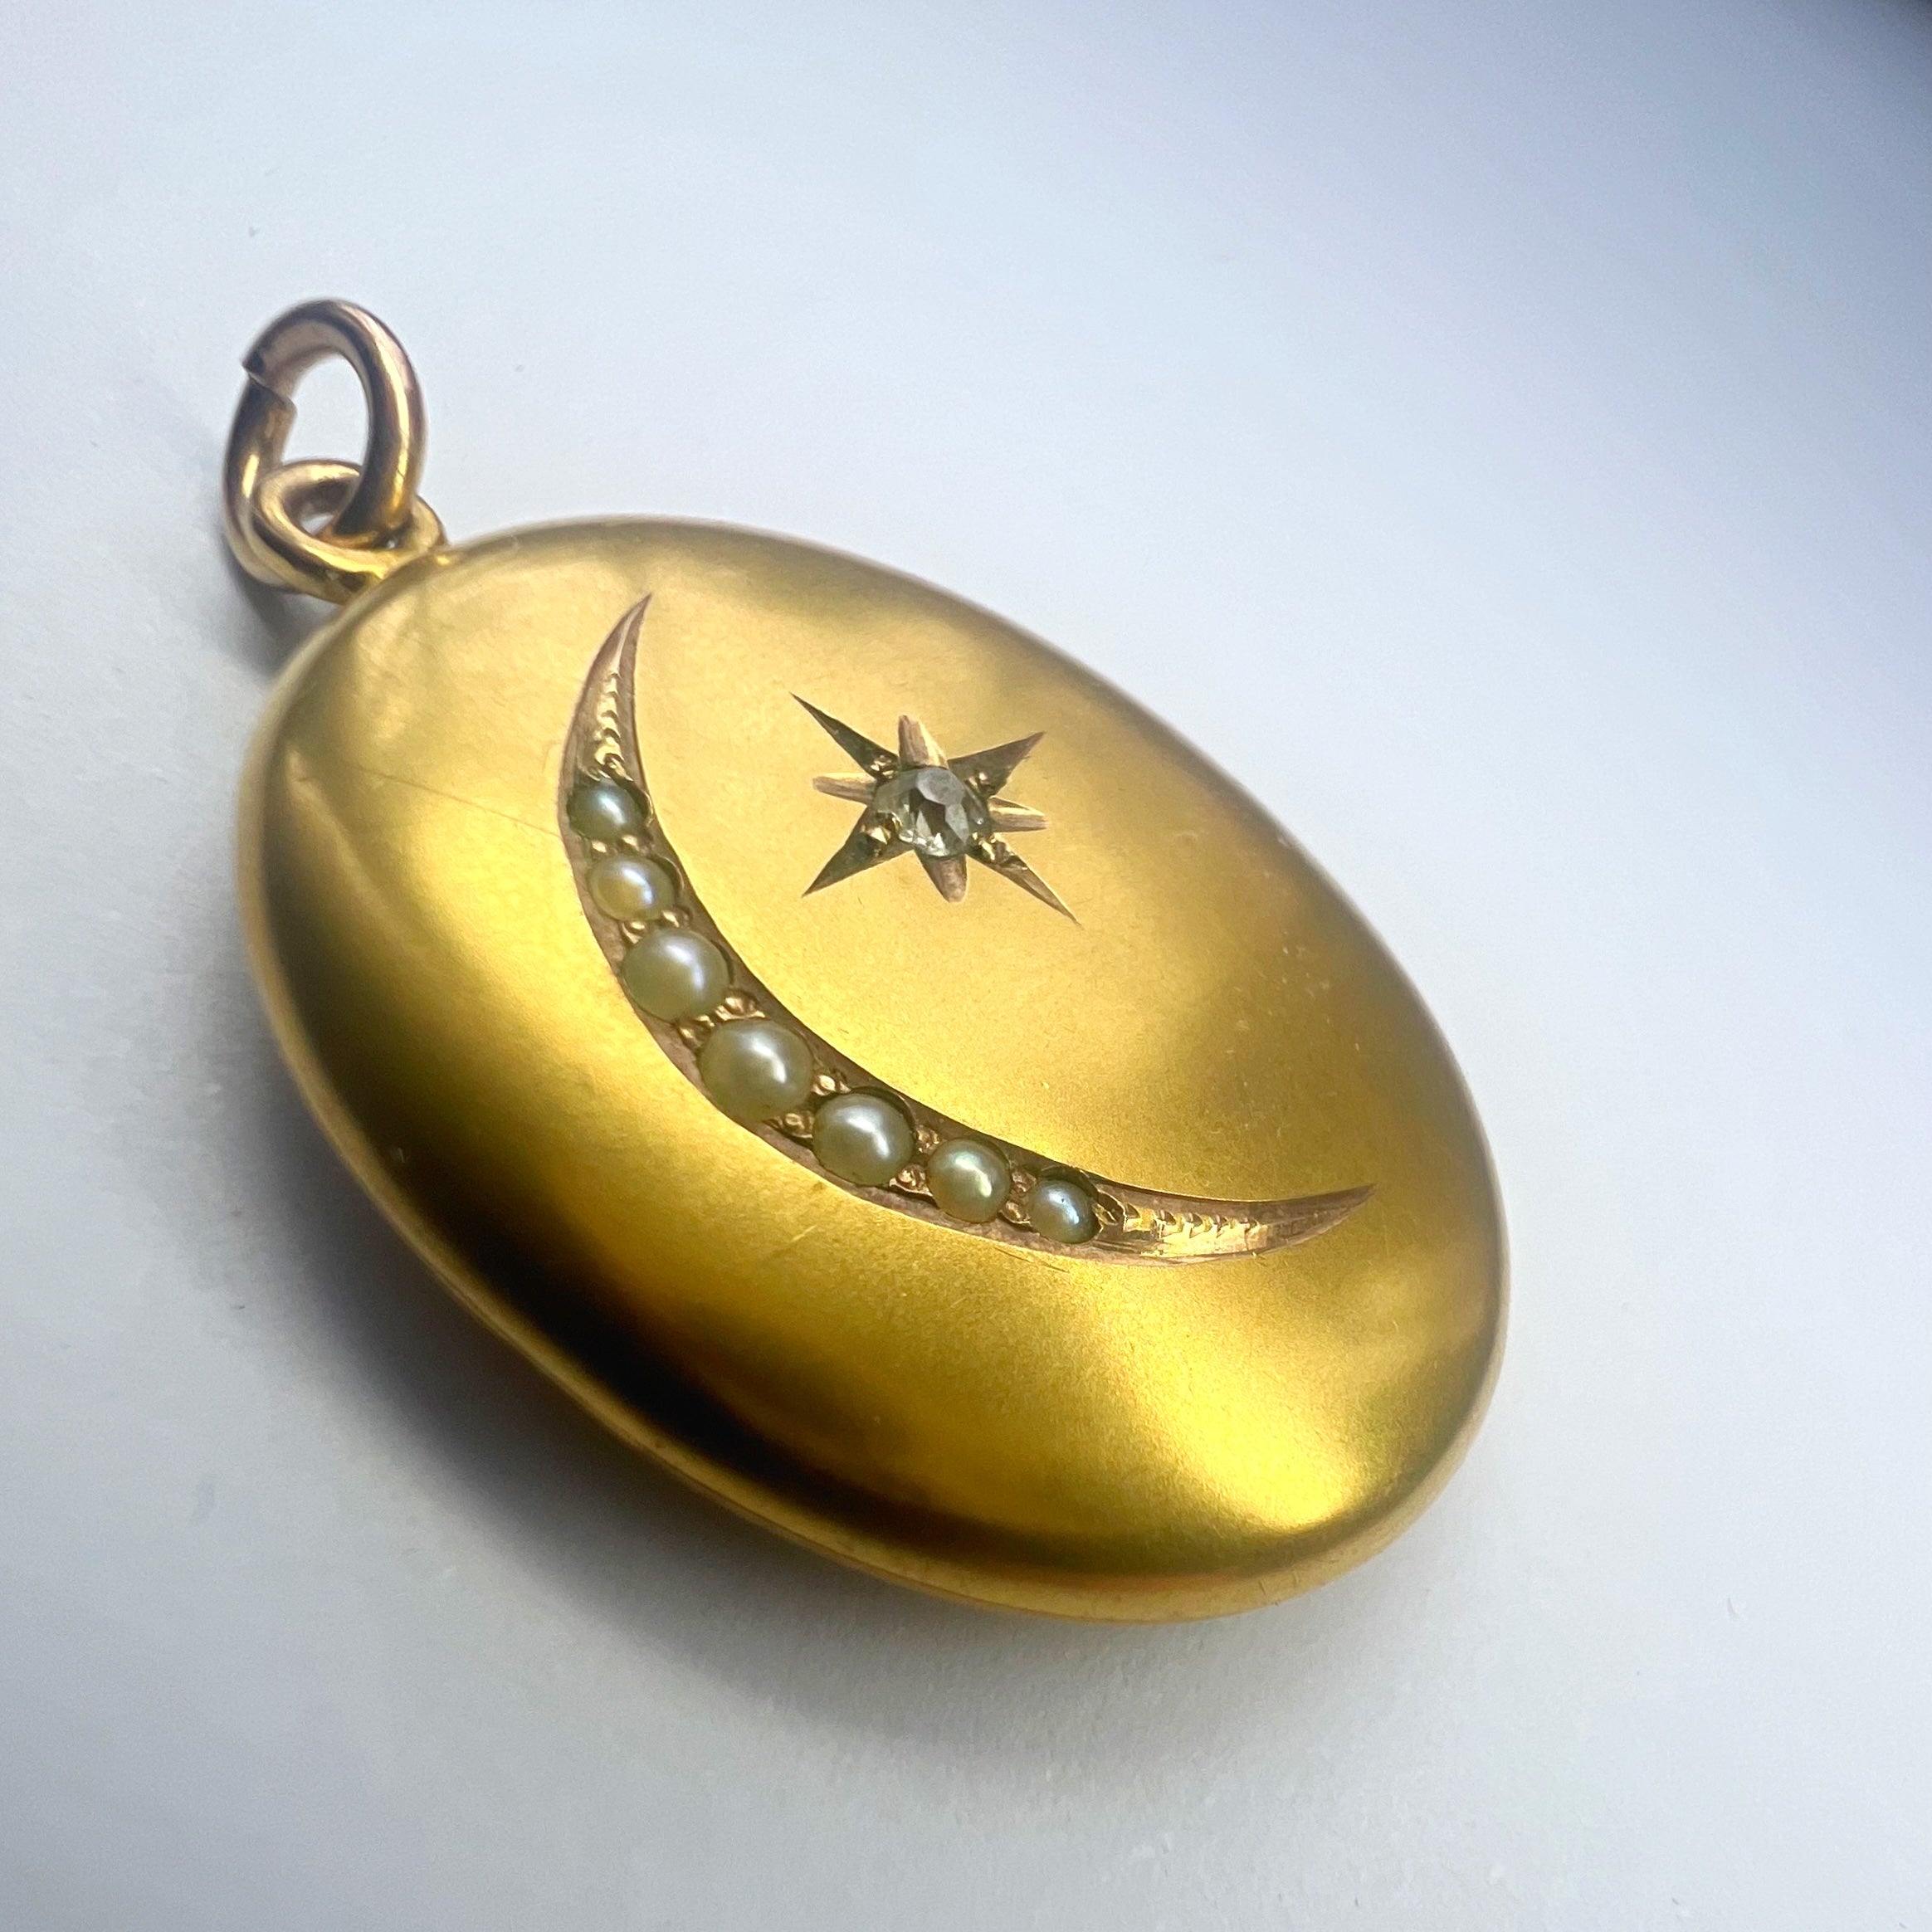 Antique Gold Locket with Star set Diamond and Seed Pearls